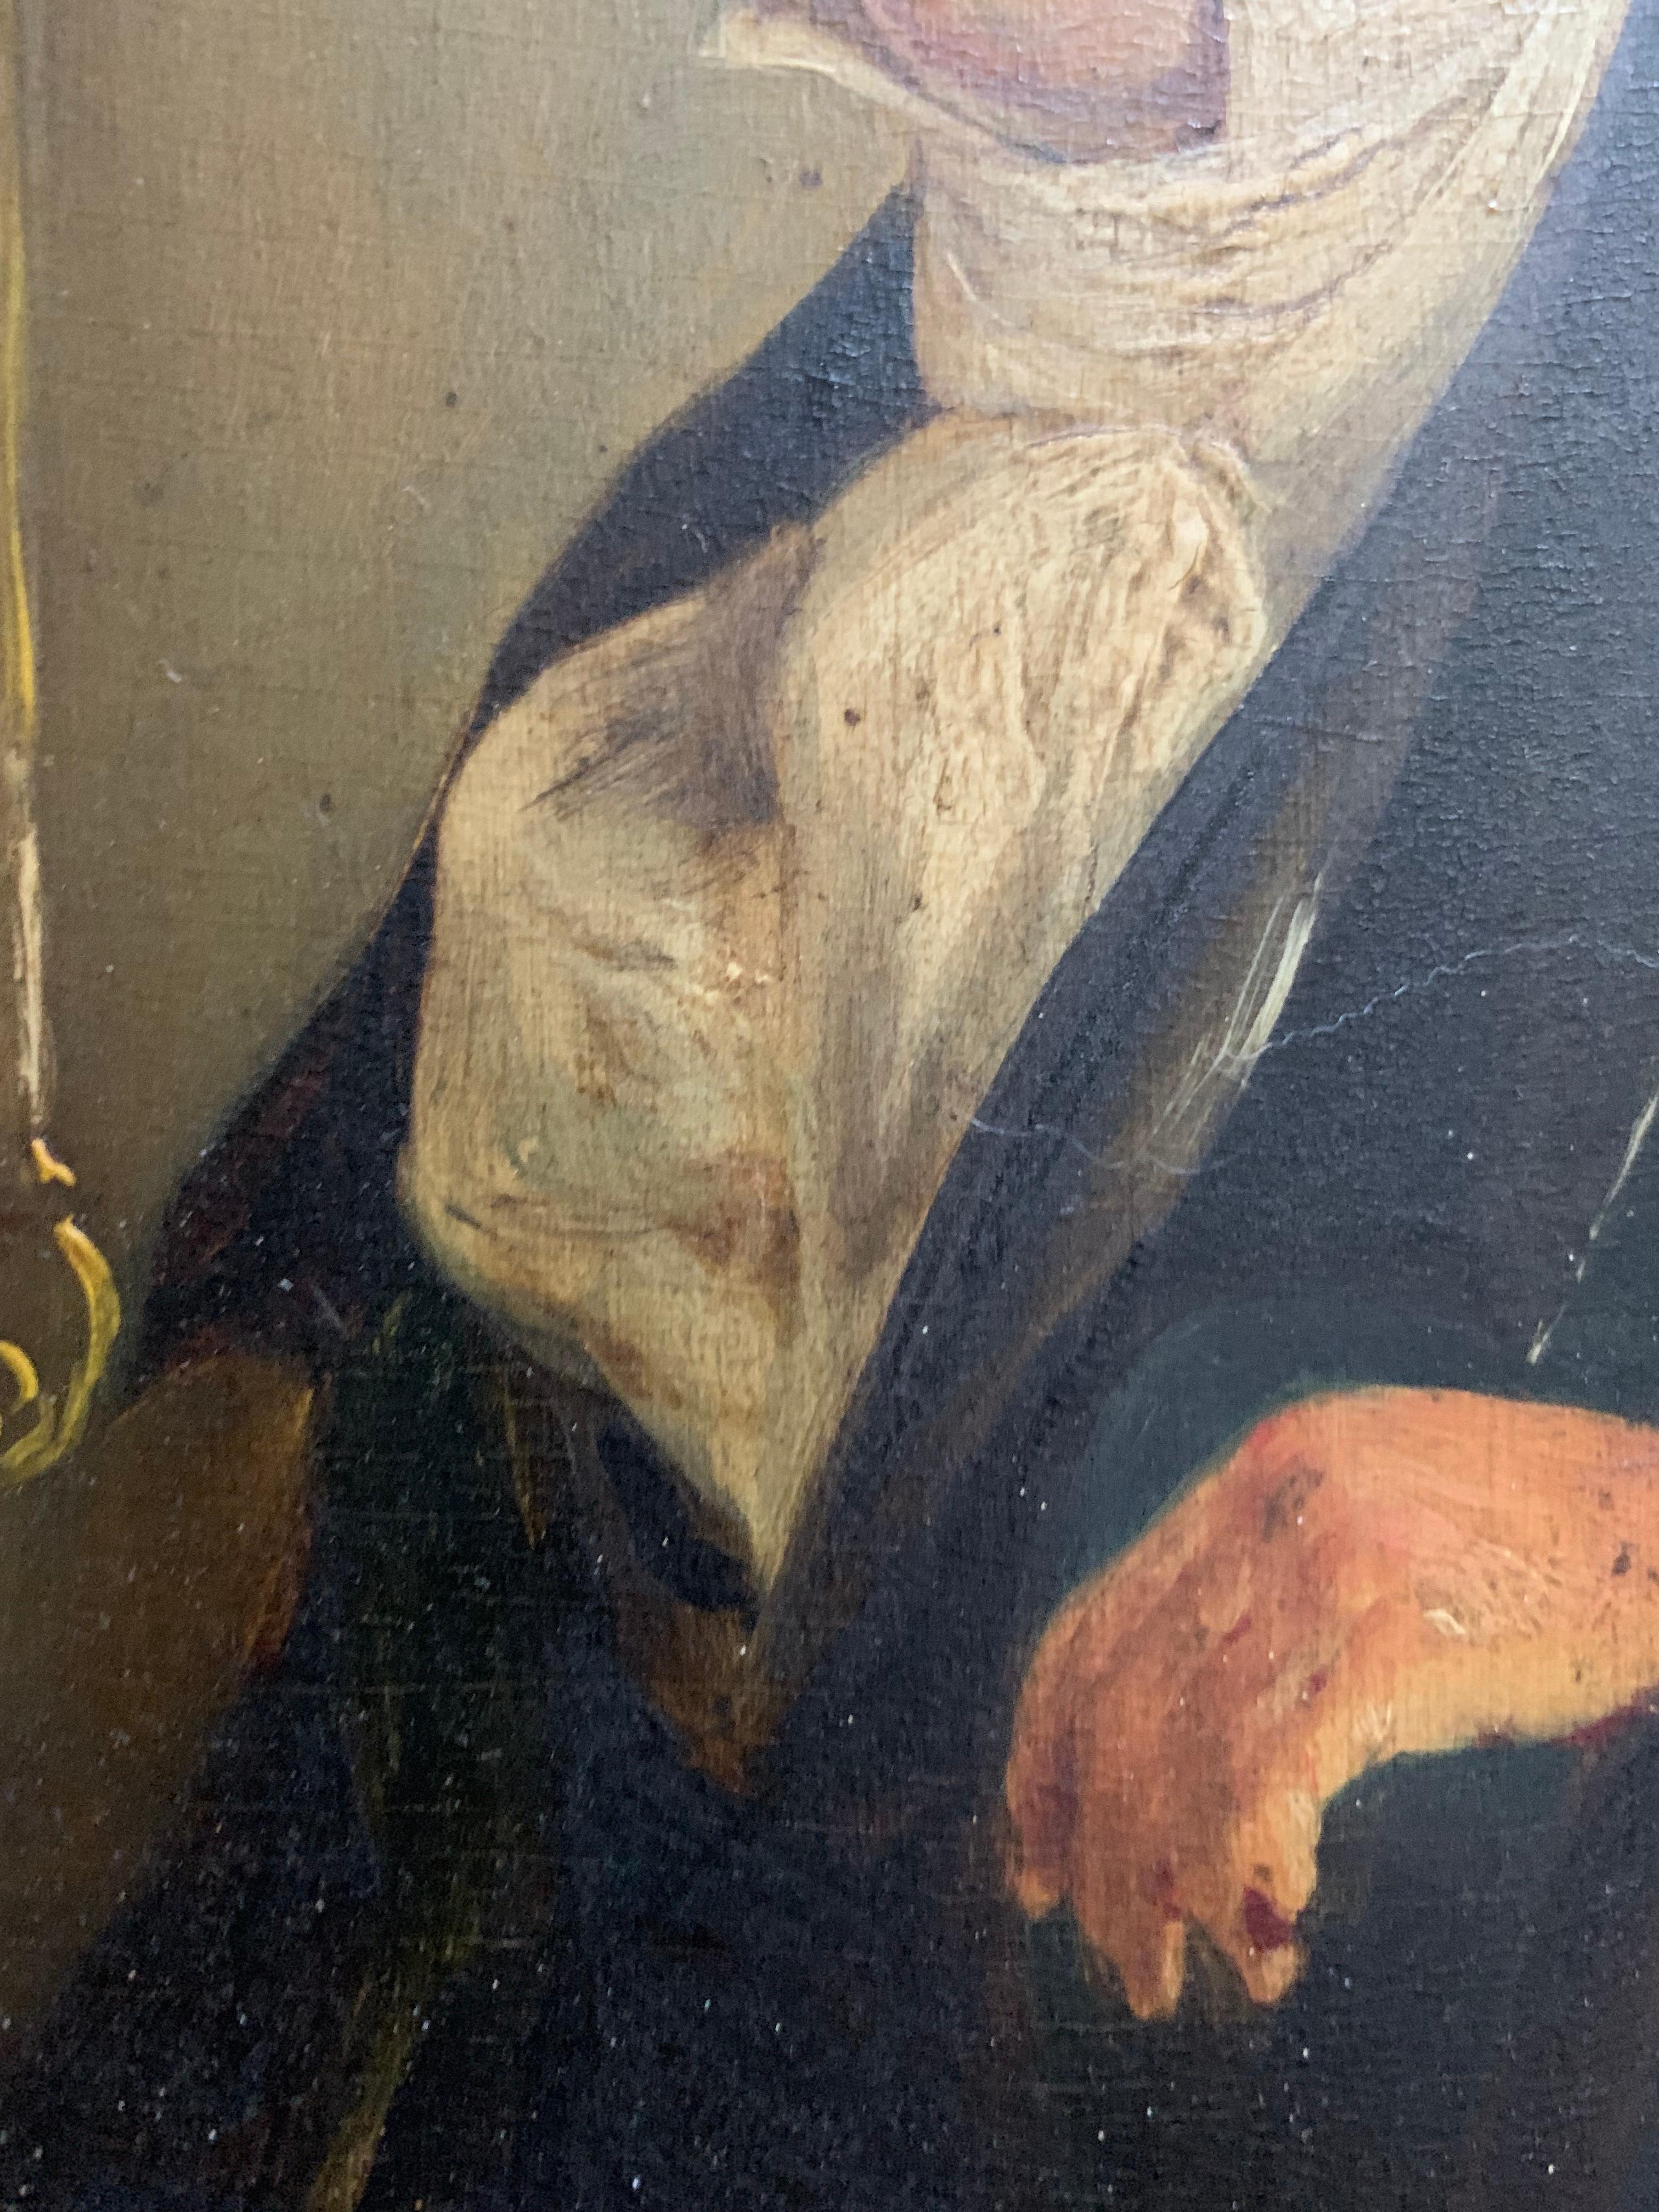 Portrait of a Gentleman, ca. 1825. Oil on wood panel measuring 9 x 12 inches; 13.5 x 16.5 inches in original wood frame. Unsigned. Original condition, the piece has never been cleaned. Long lines of paint shrinkage apparent. No loss or flaking.